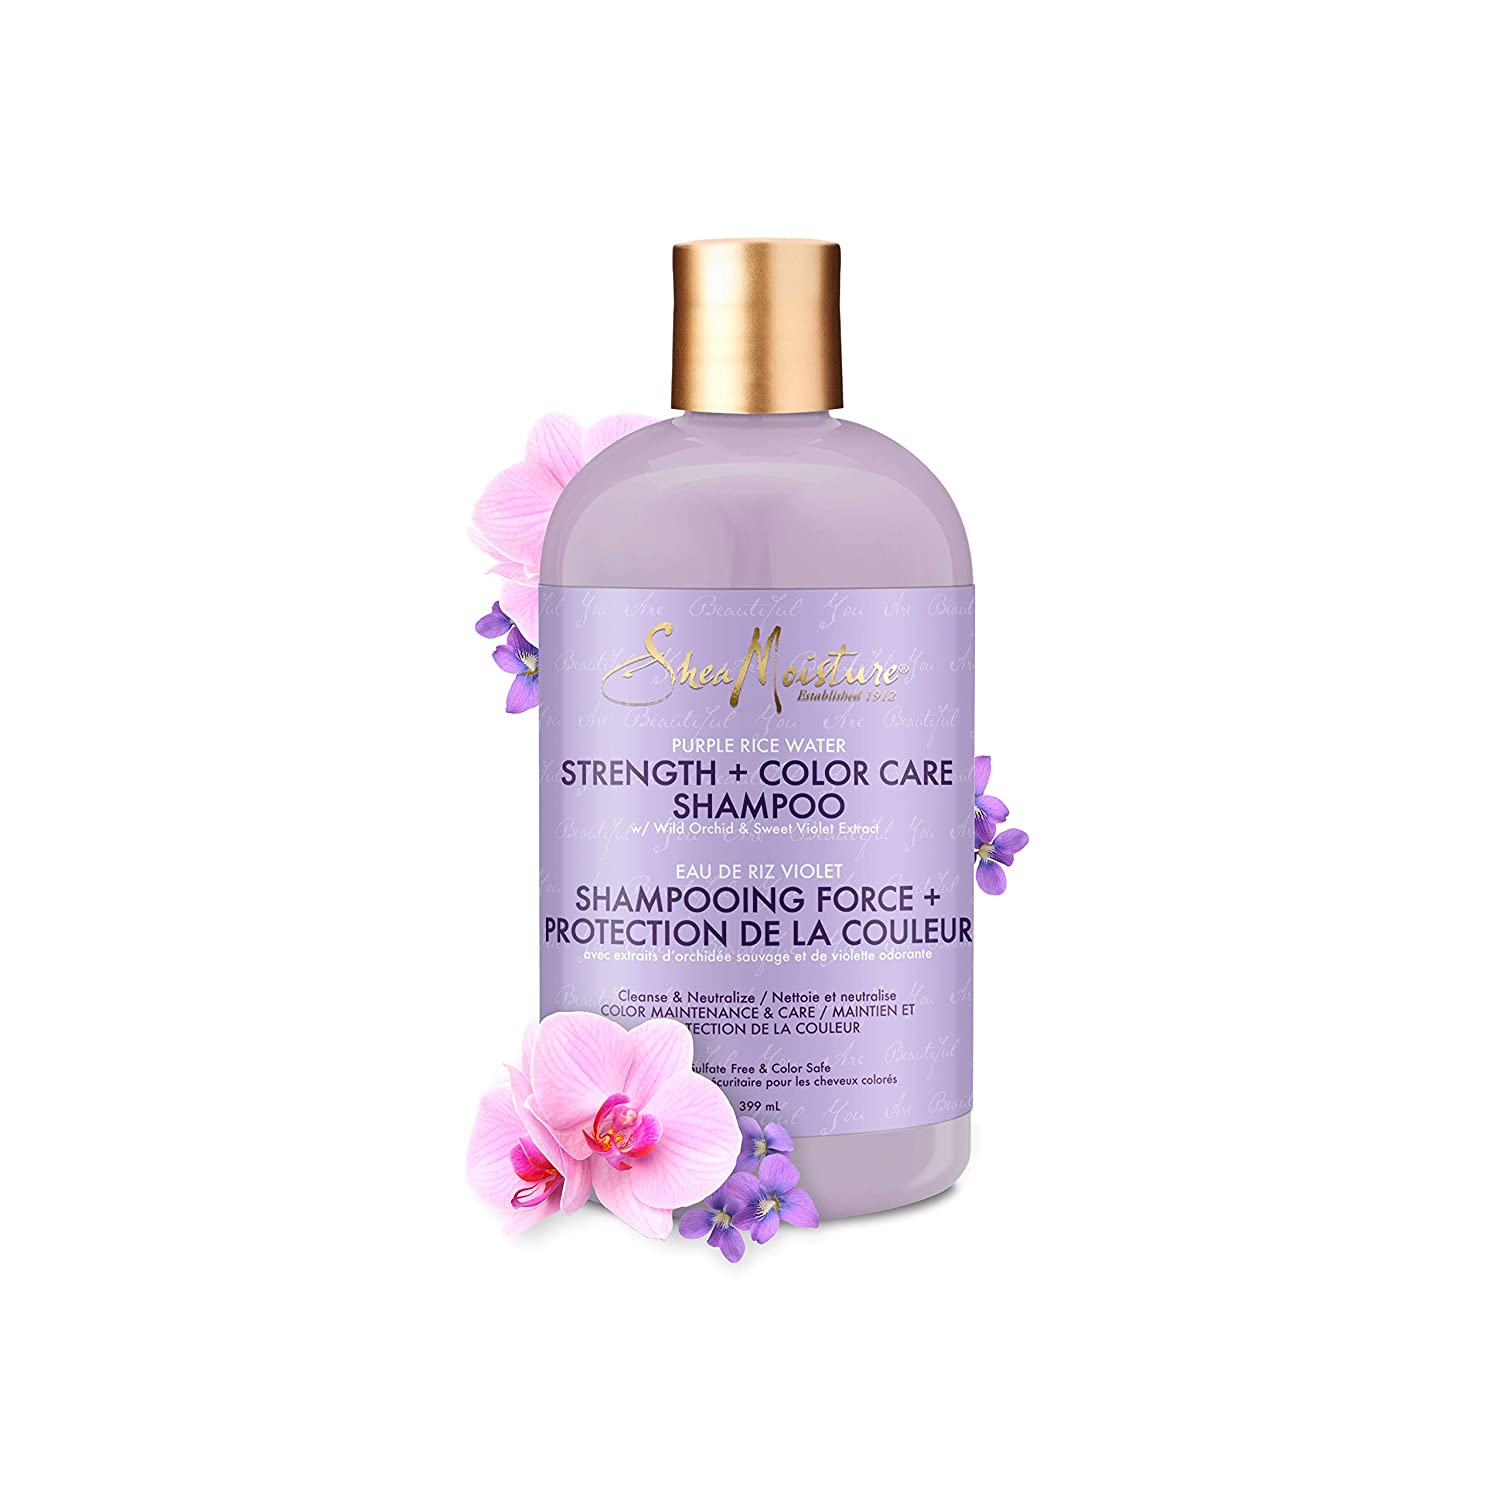 SheaMoisture Purple Rice Water Strength + Color Care Shampoo for Damaged Hair 13.5 fl ounce Find Your New Look Today!